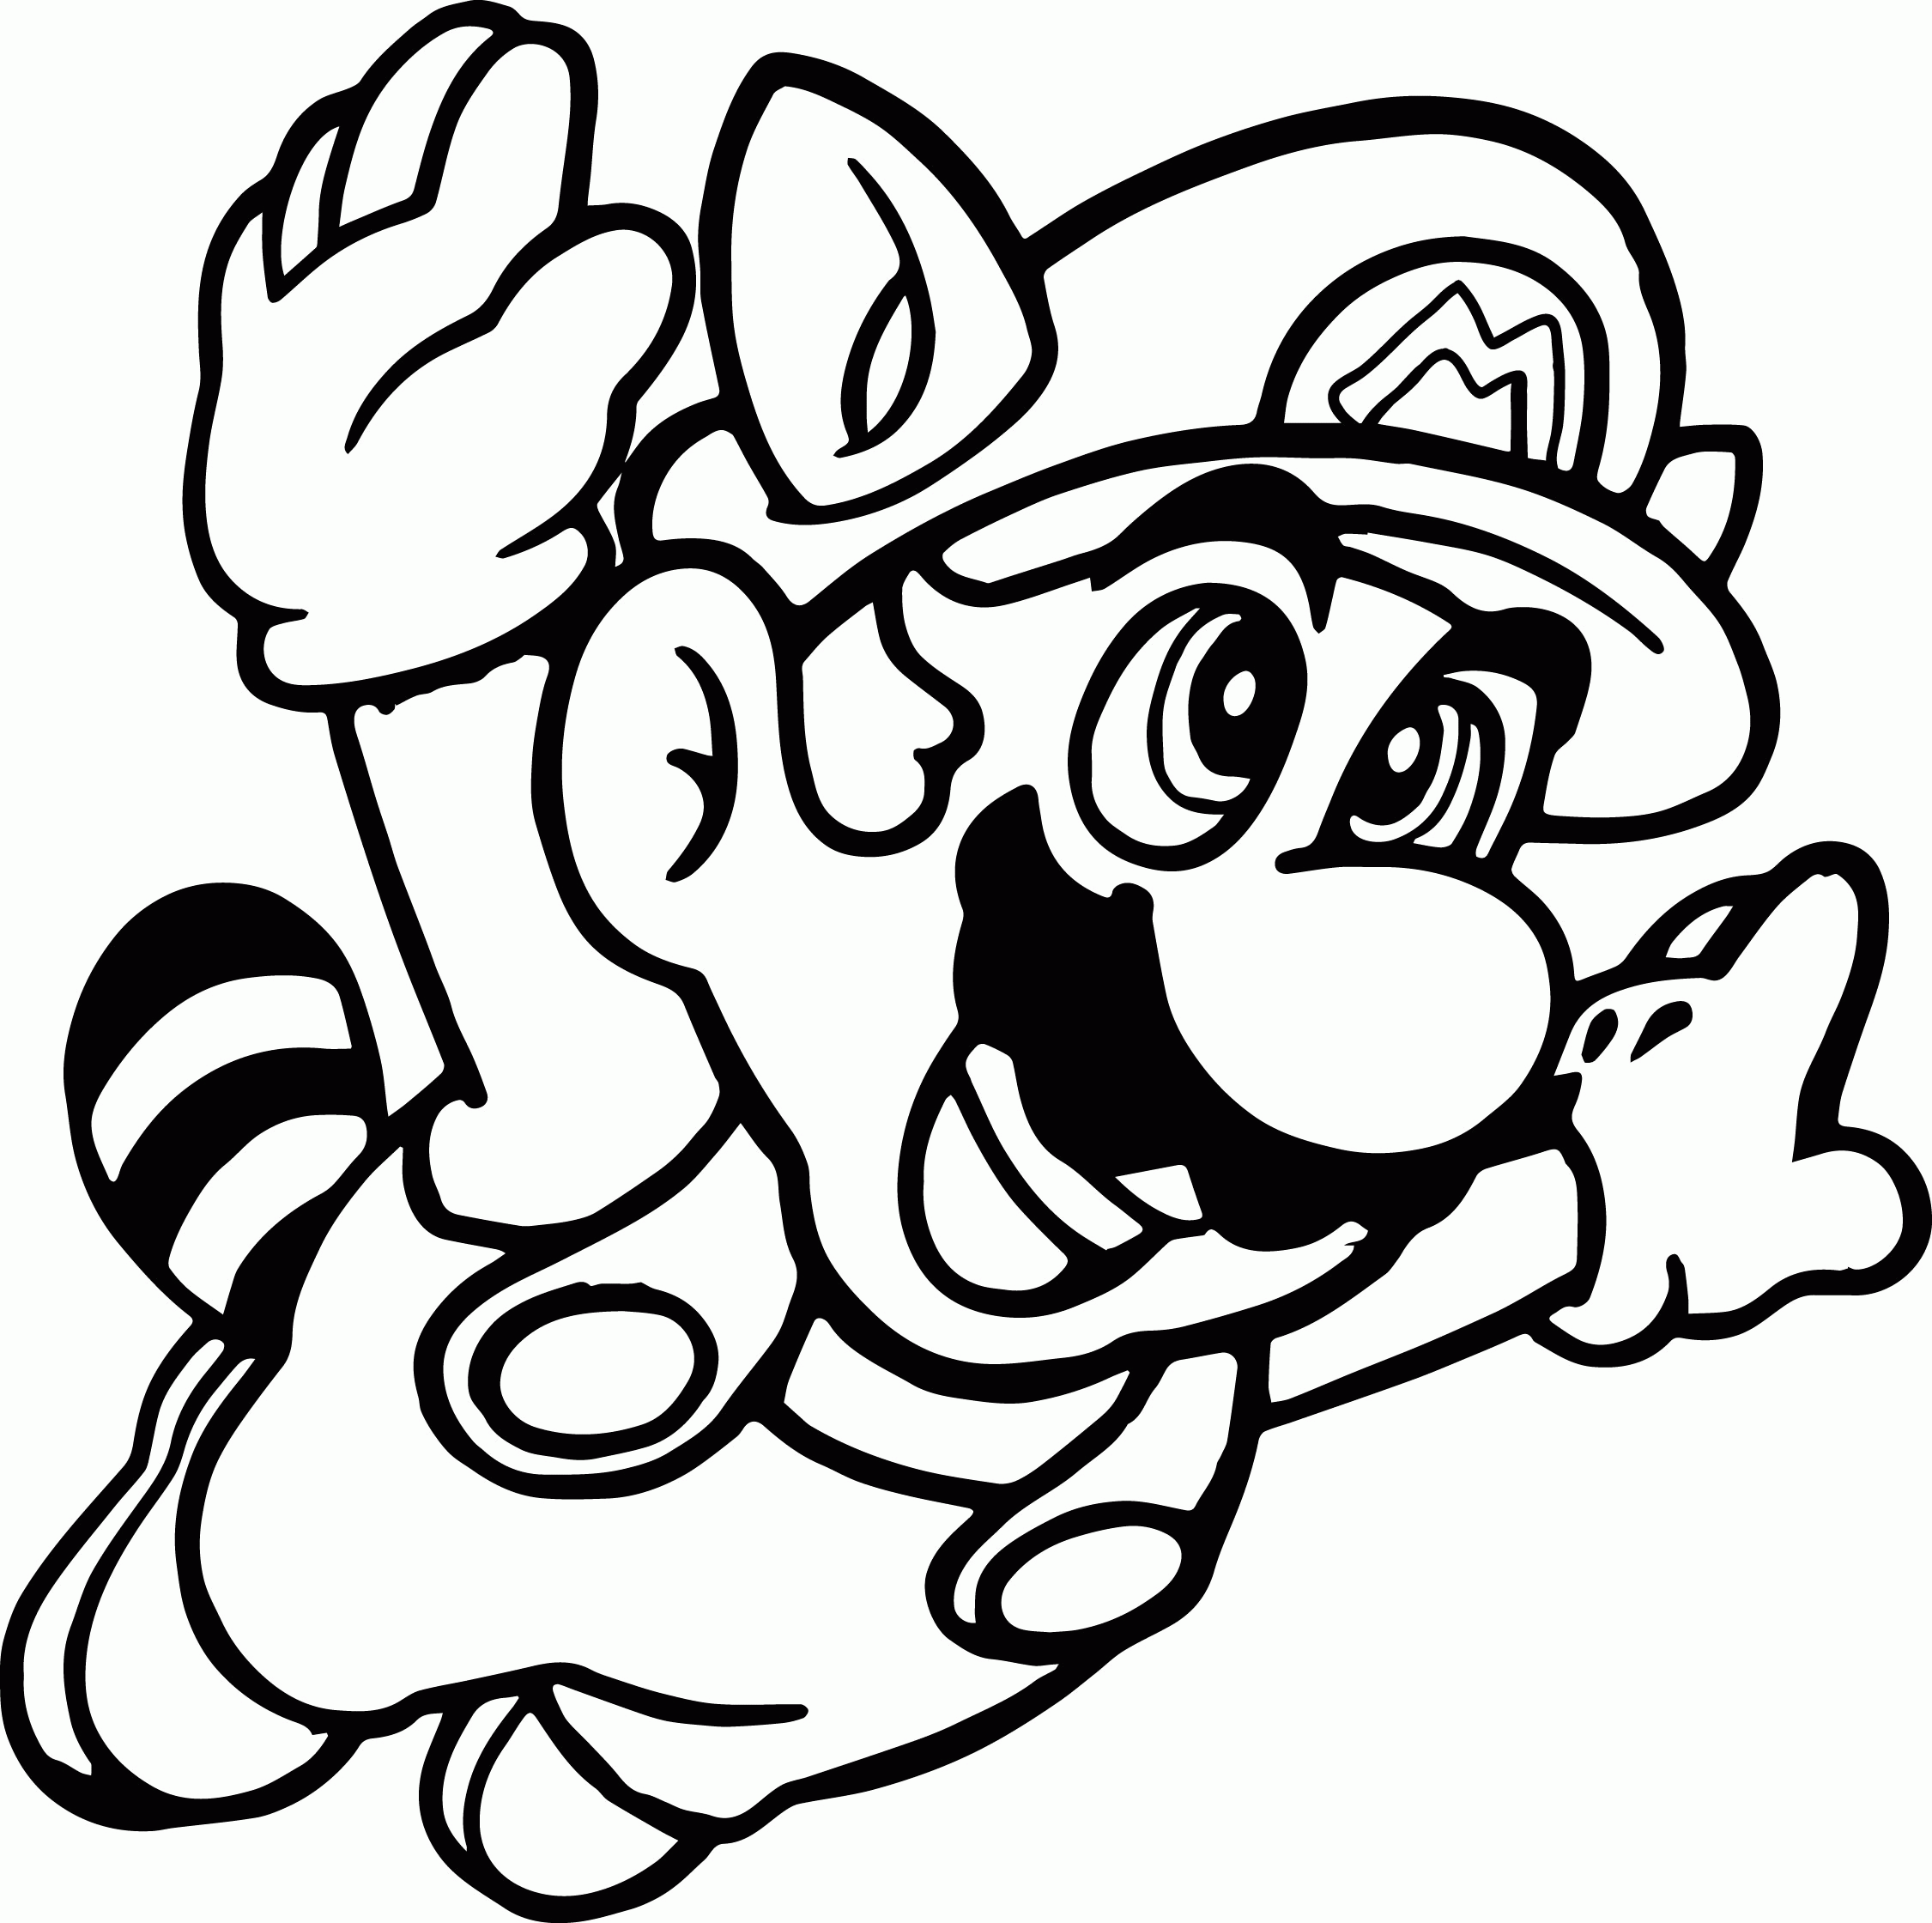 Free Toad Coloring Pages From Super Mario, Download Free Toad Coloring